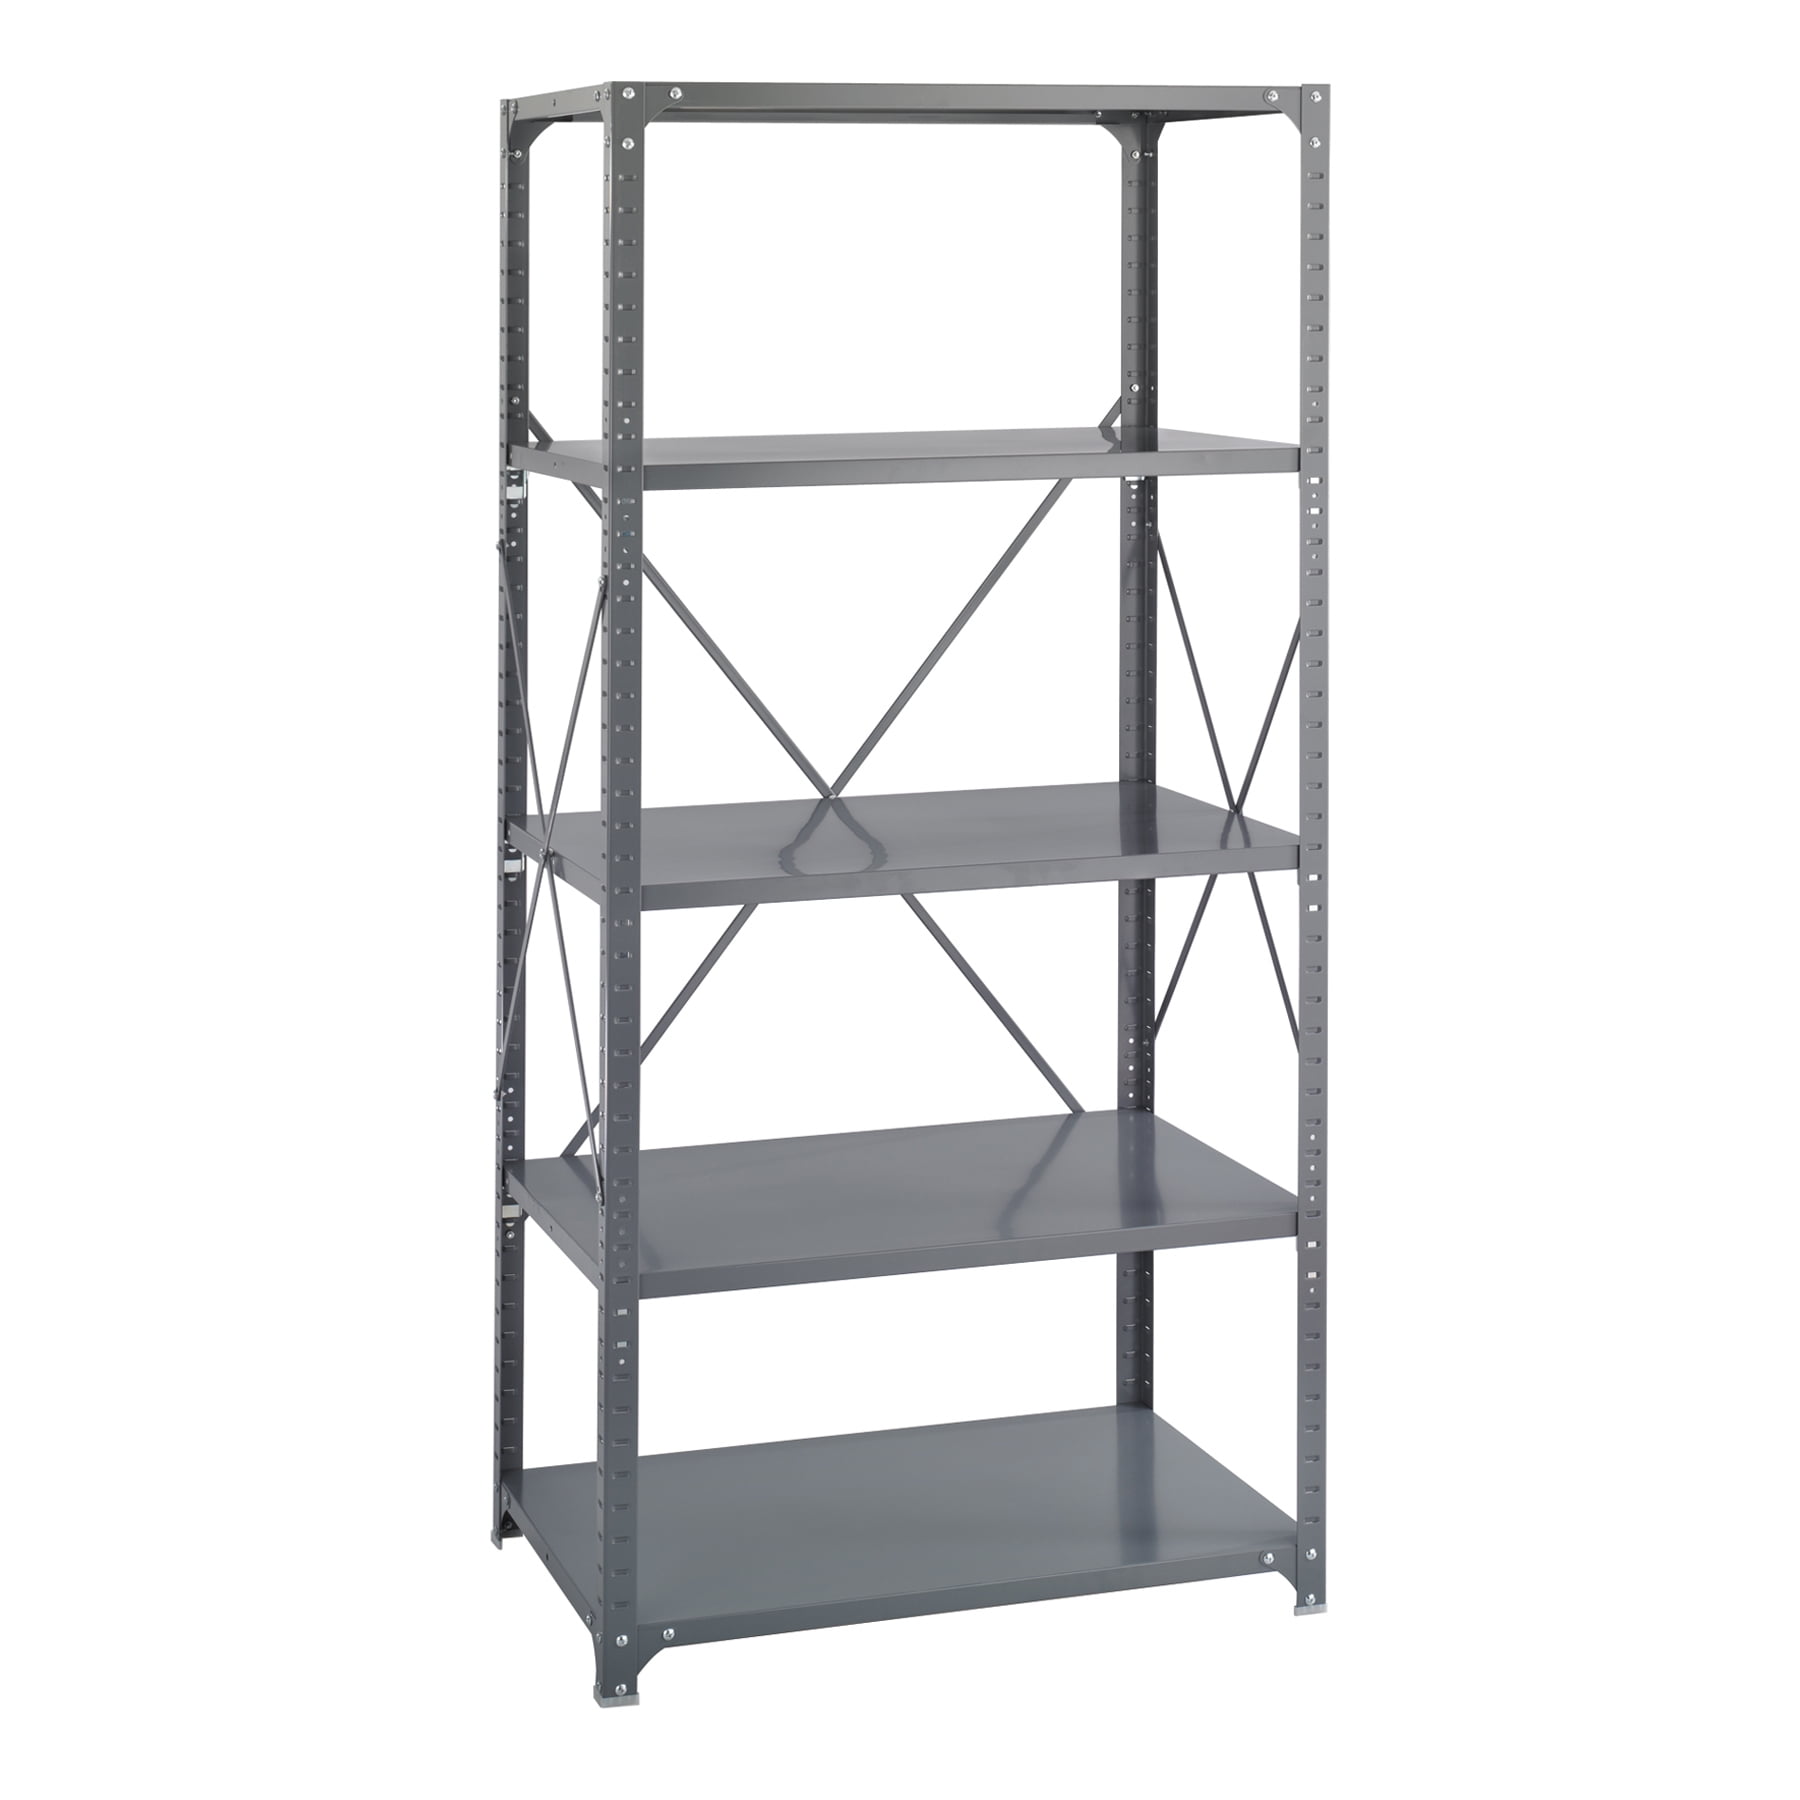 Safco 6267 Steel Shelving 36 X 24, 36 Inch High Shelving Unit